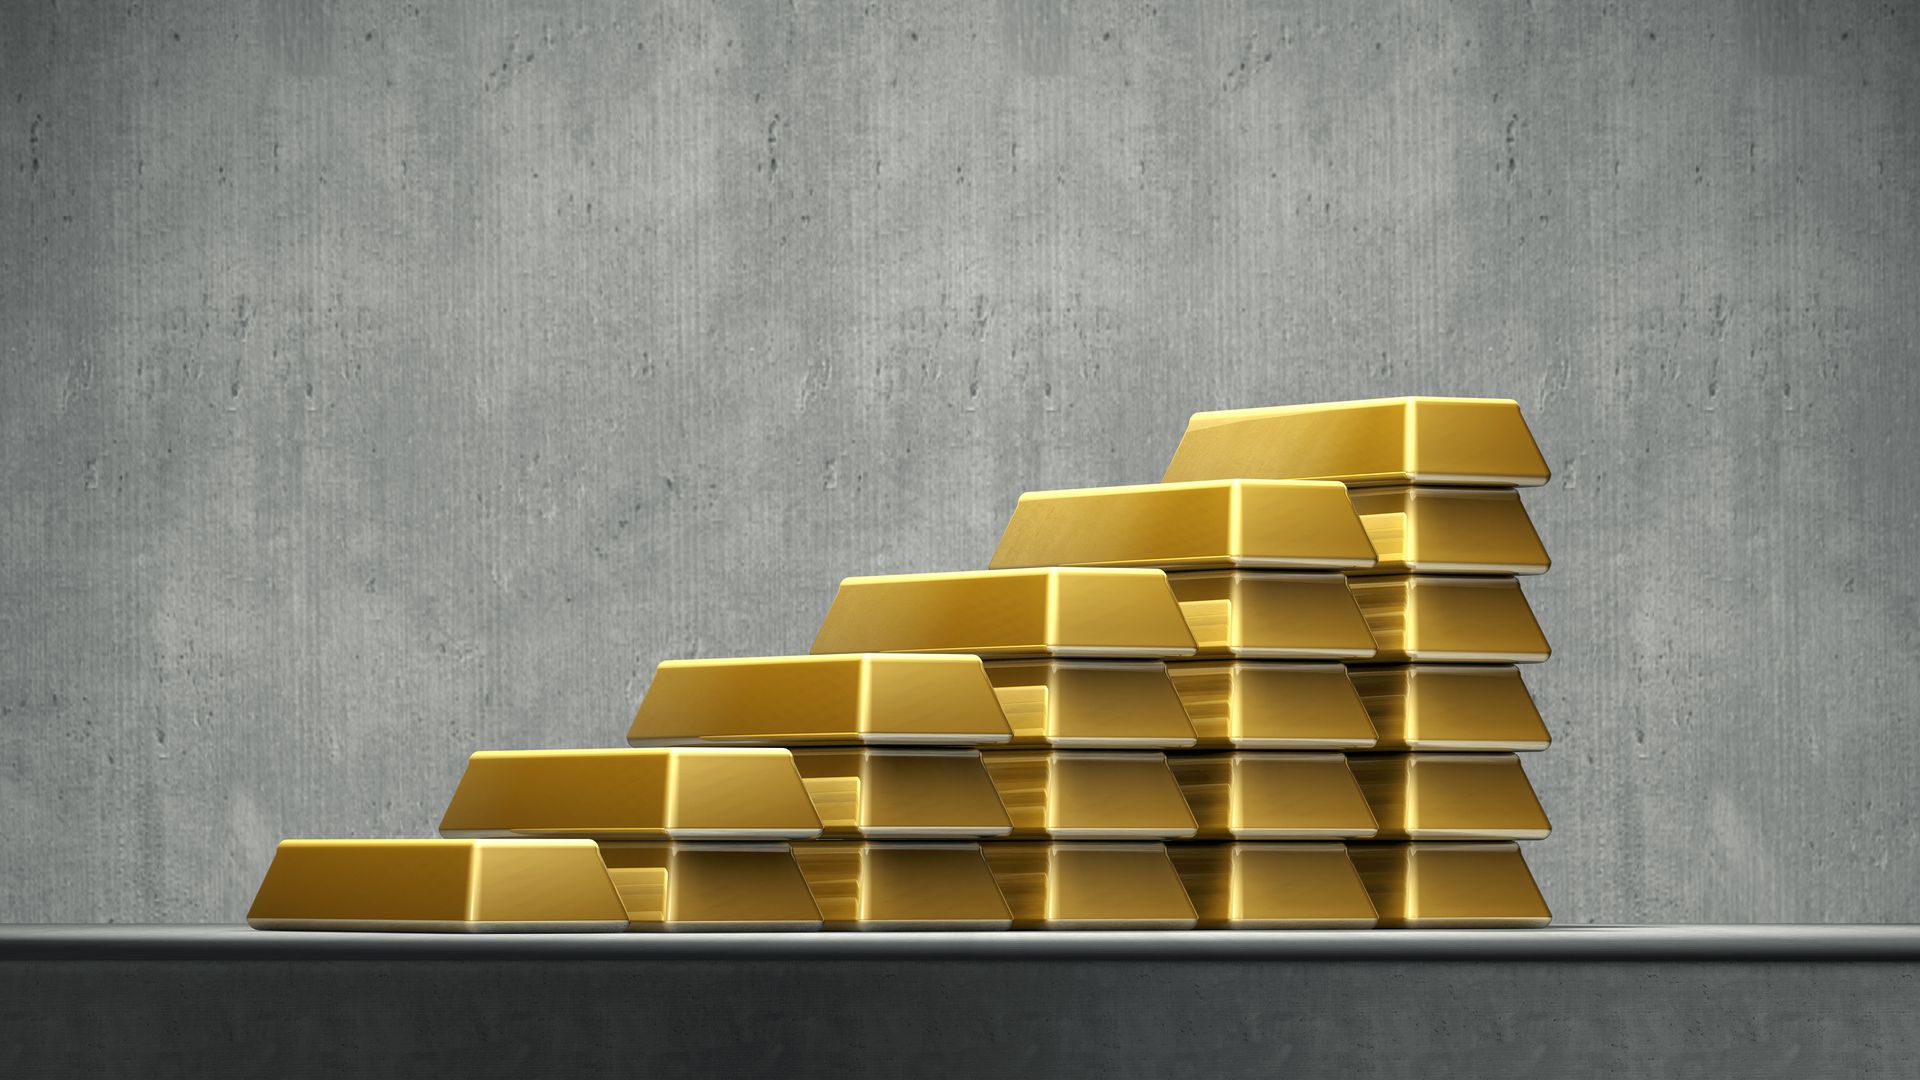 Gold bars stacked on top of each other